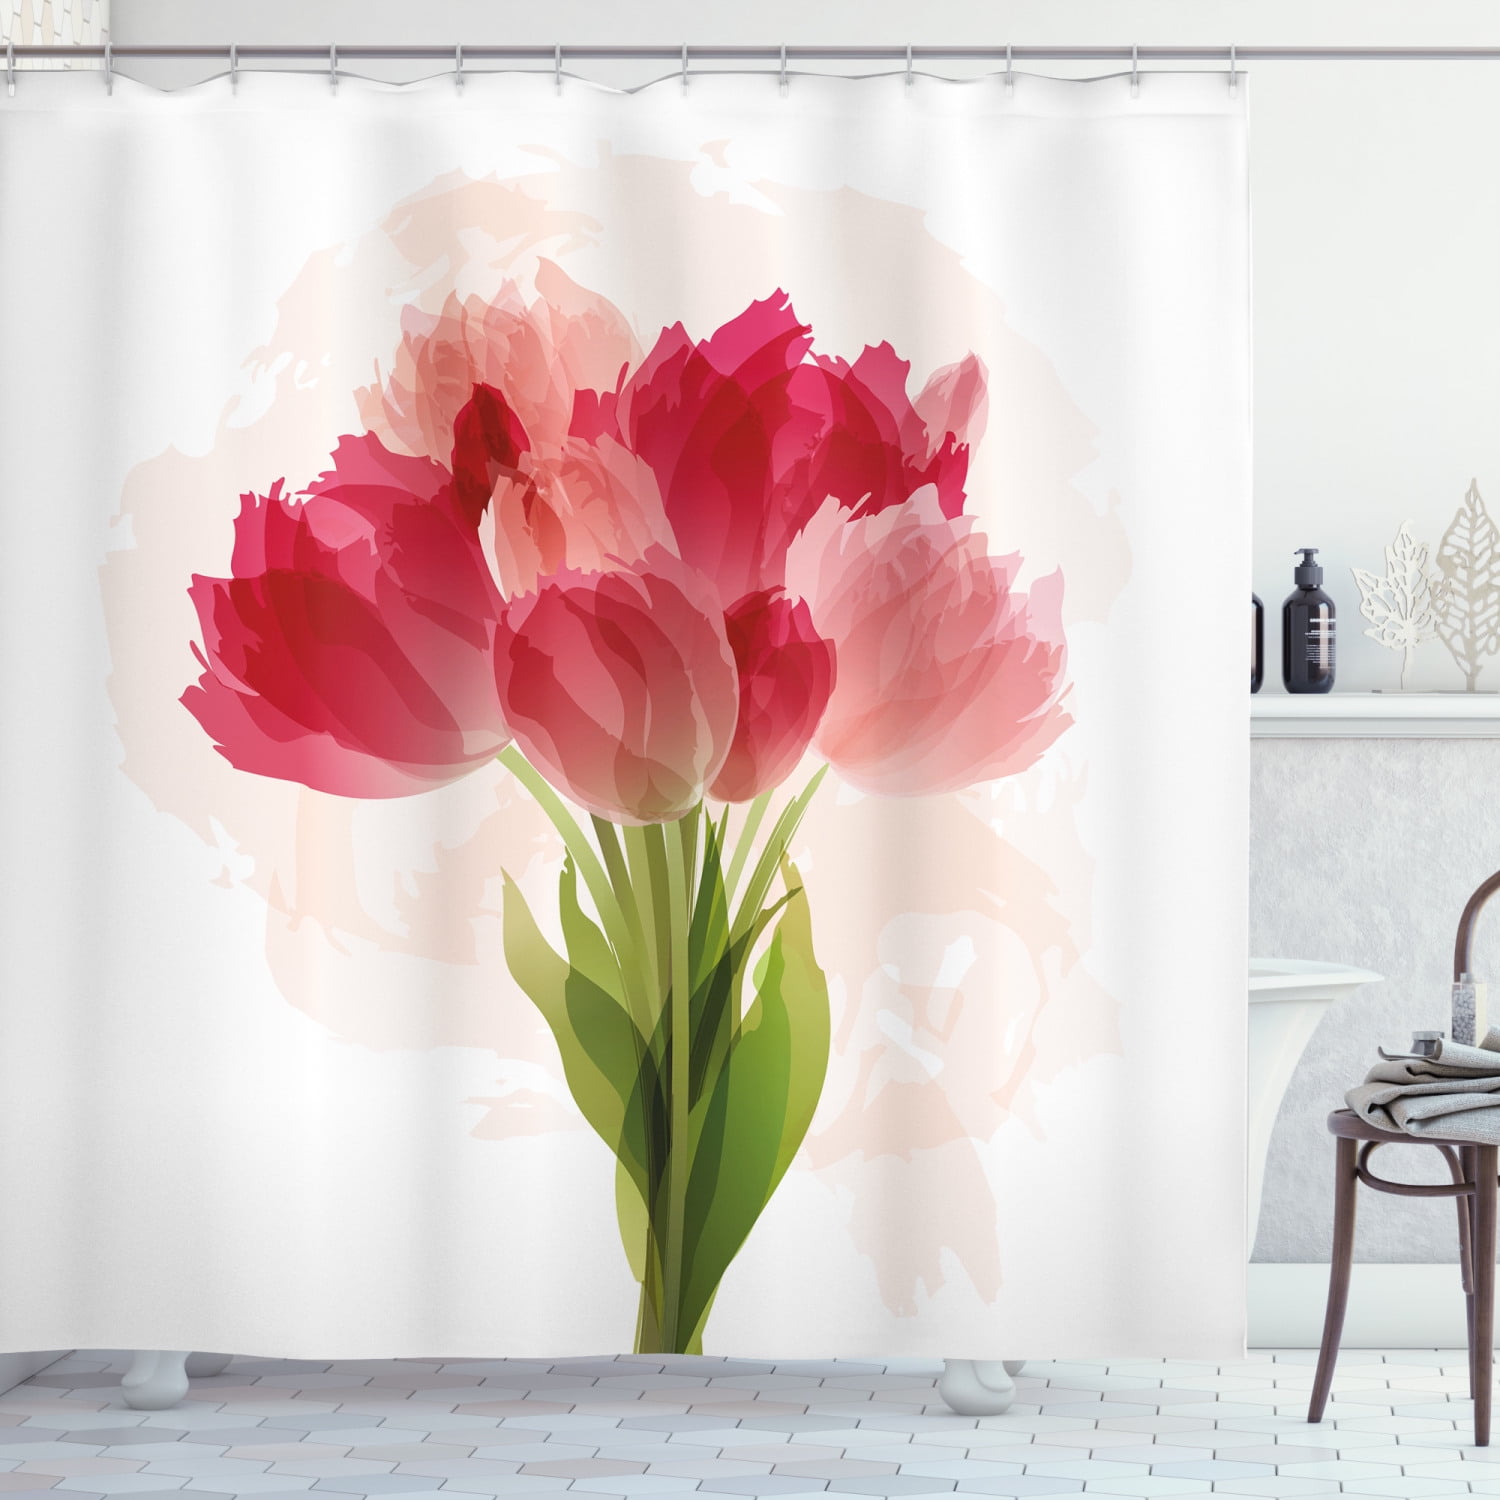 Blooming Flowers Butterfly Water 3D Printing Curtain Mural Blockout Draps Fabric 